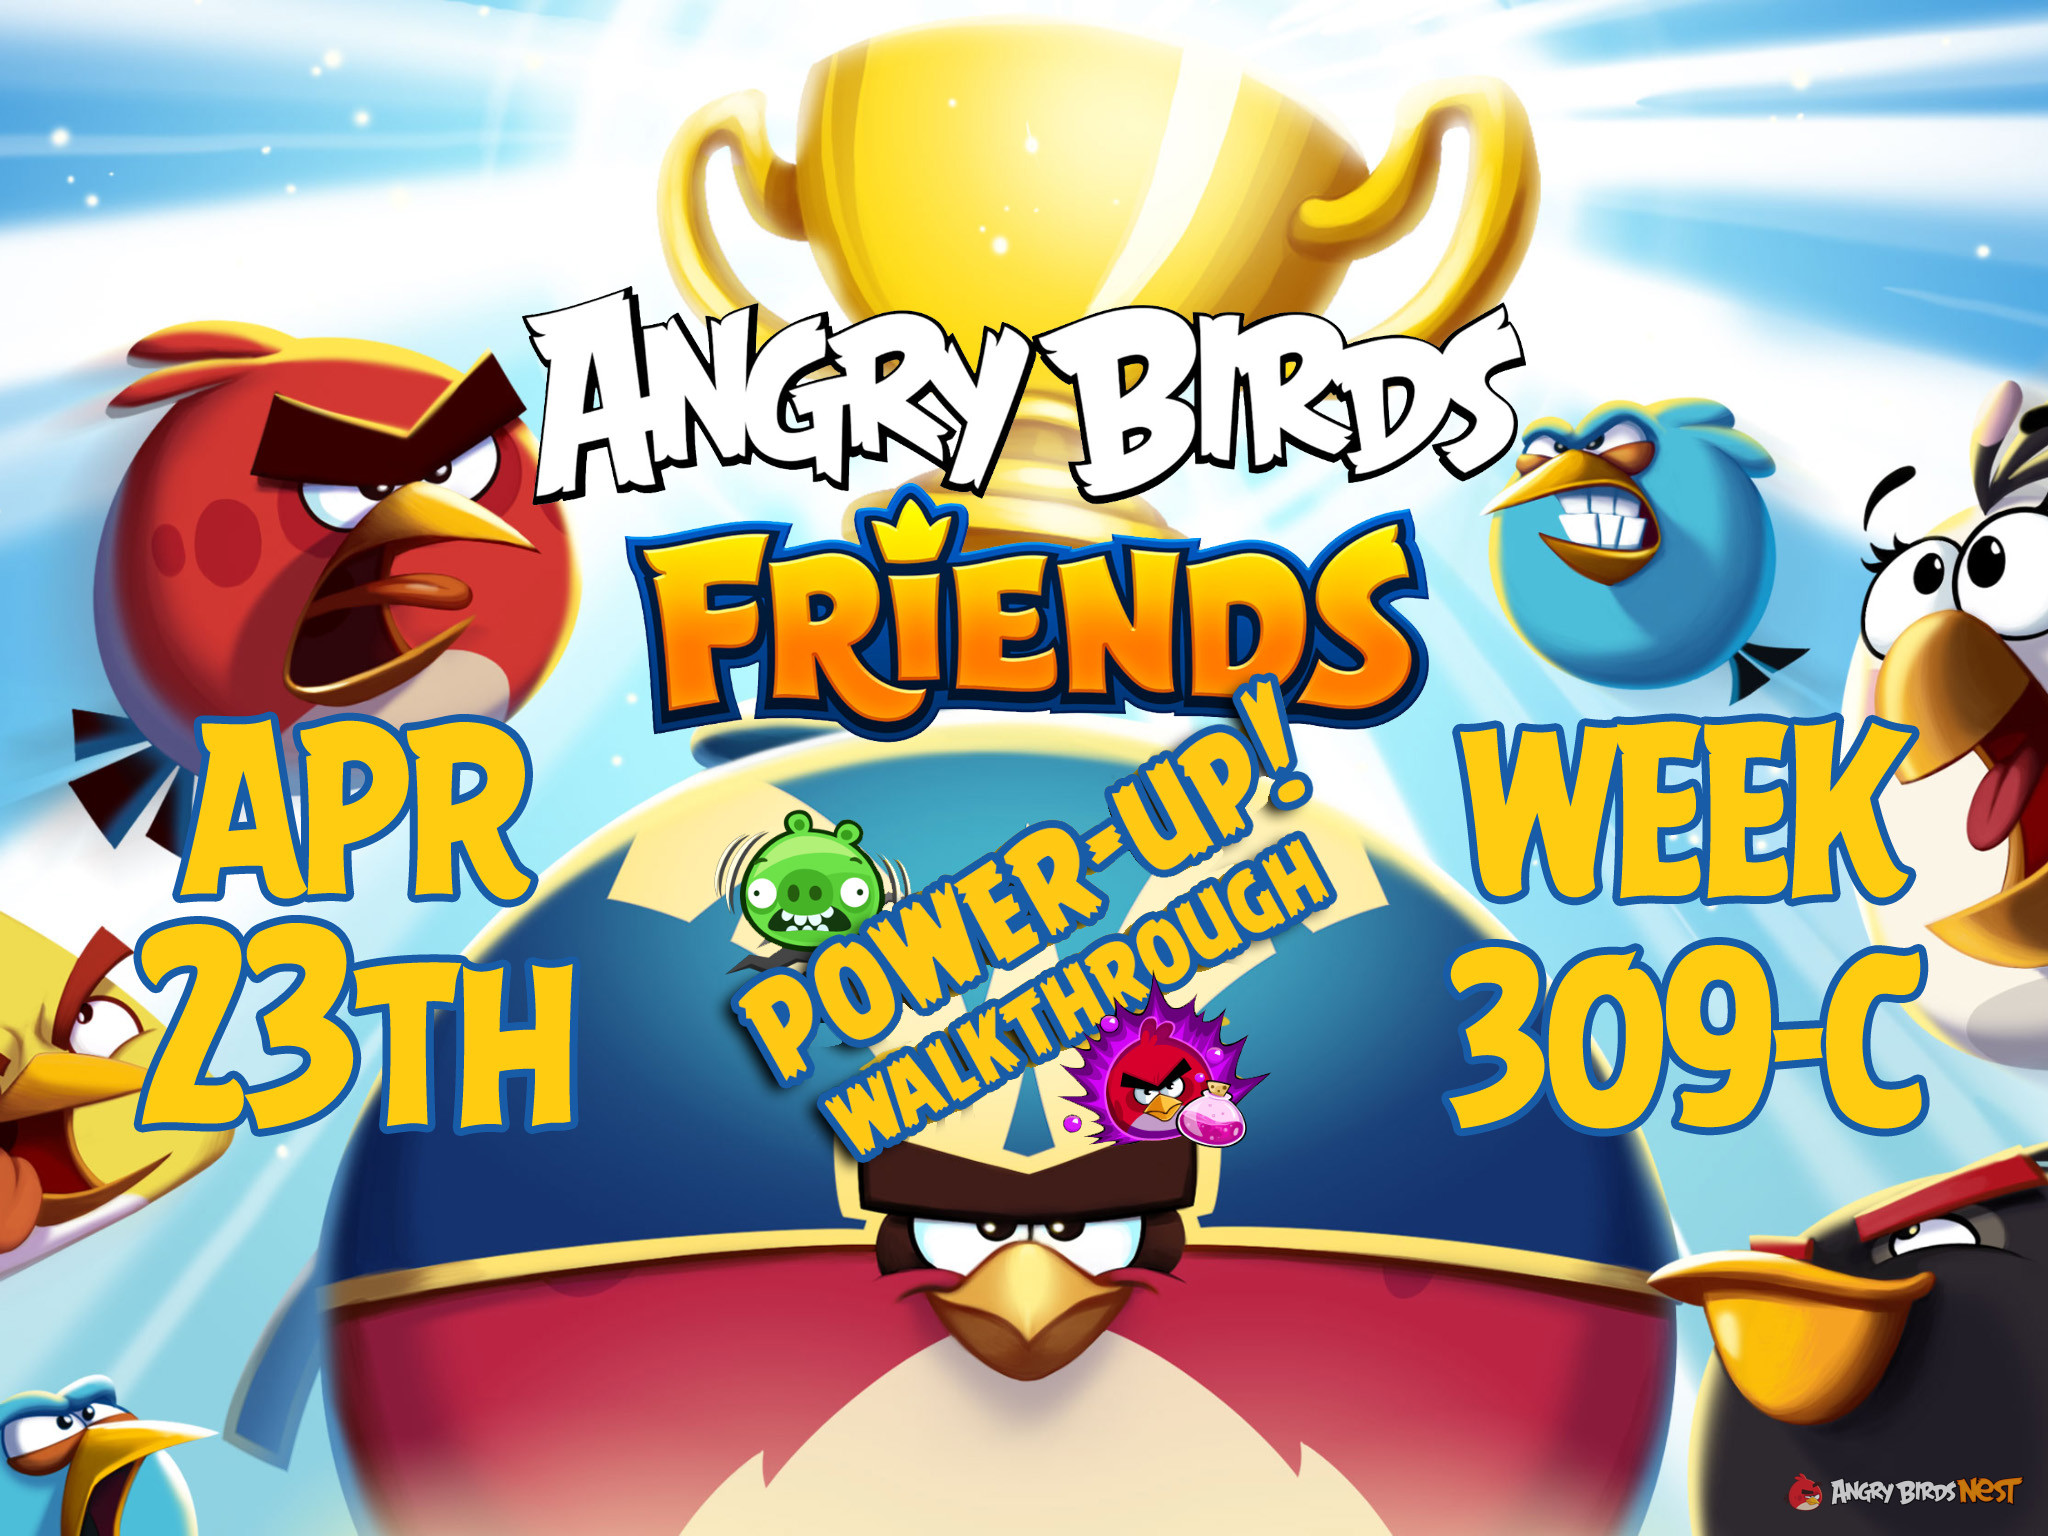 Angry Birds Friends Tournament Week 309-C Feature Image PU